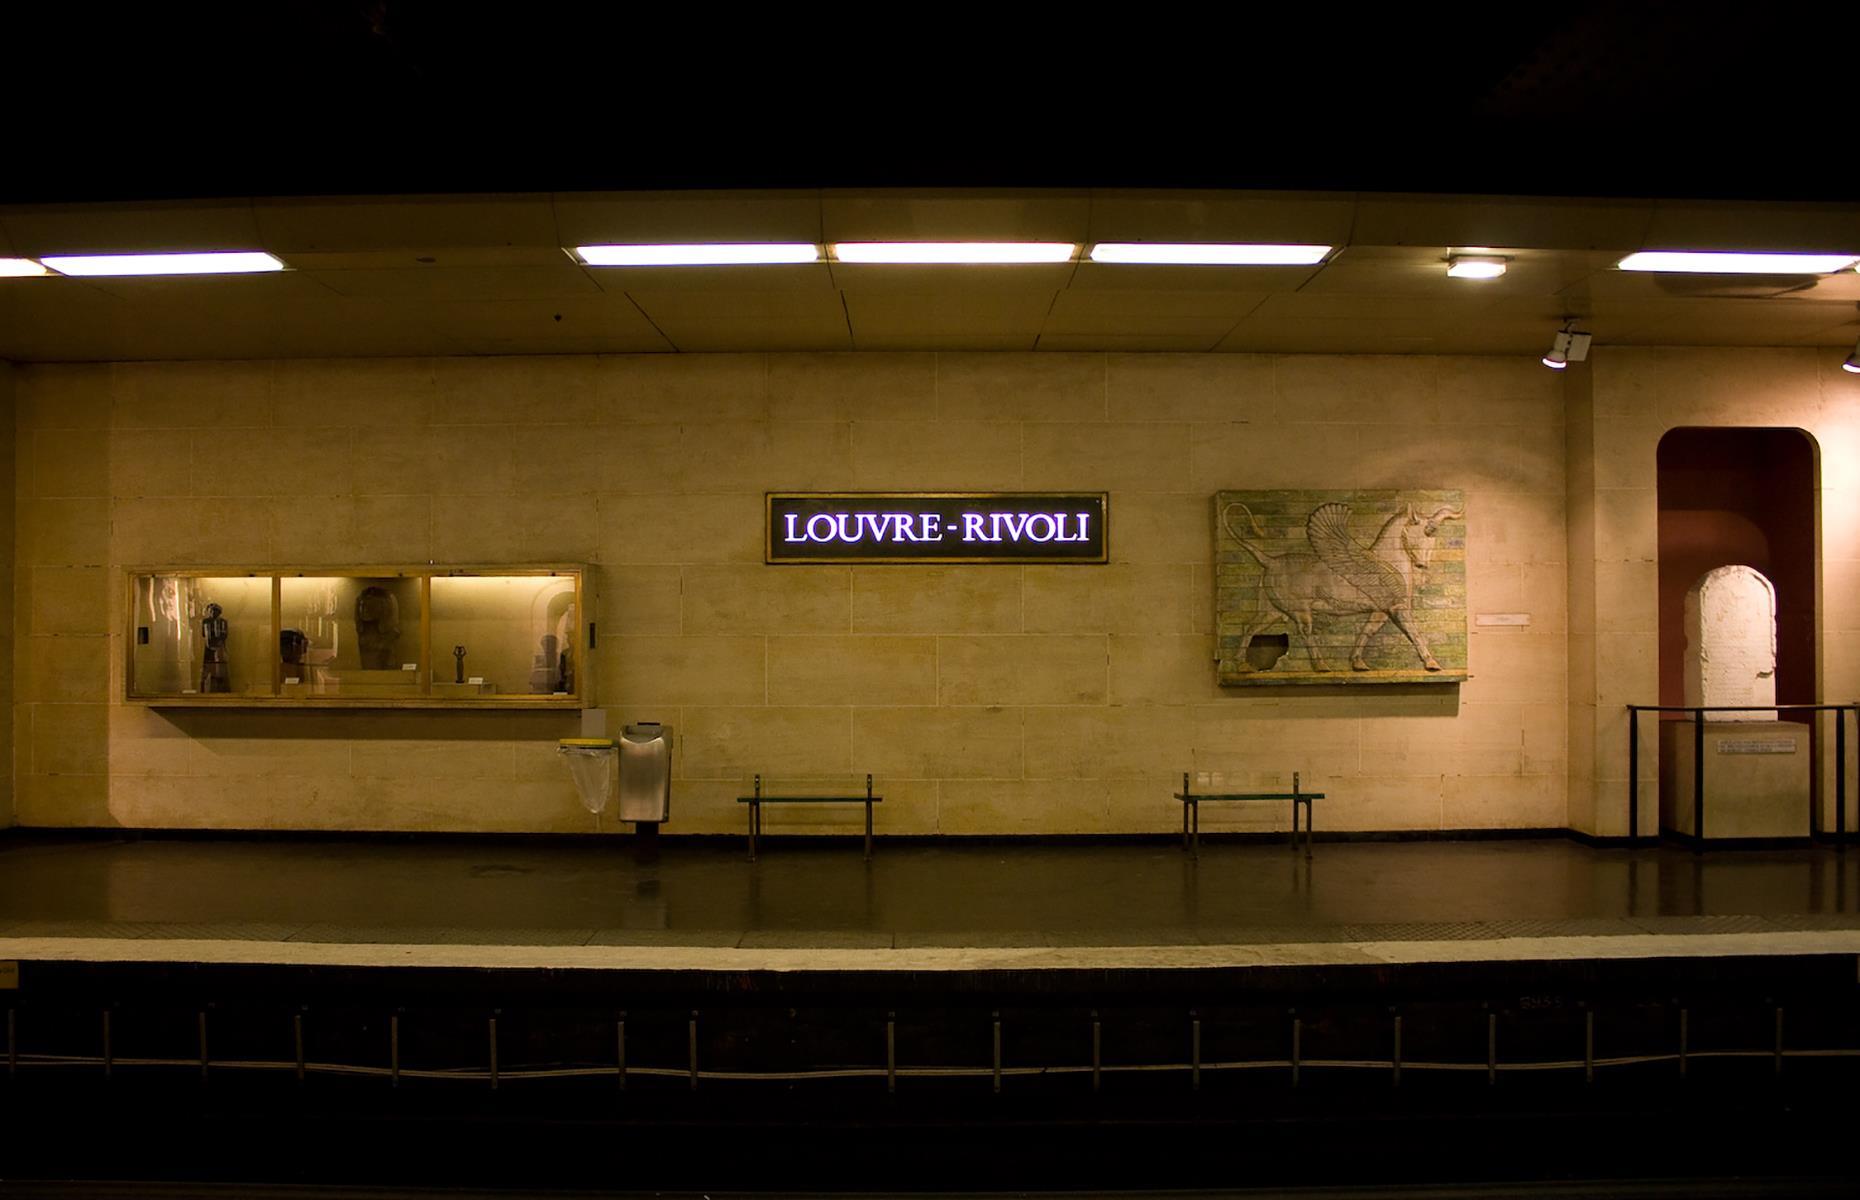 Decorated to represent the famous museum that sits above ground, the platforms at the Louvre Rivoli station on Line 1 are filled with a curated collection of replica artworks. Although this newly renovated station doesn’t have direct access to Louvre anymore, it’s still worth getting off here just to see it.